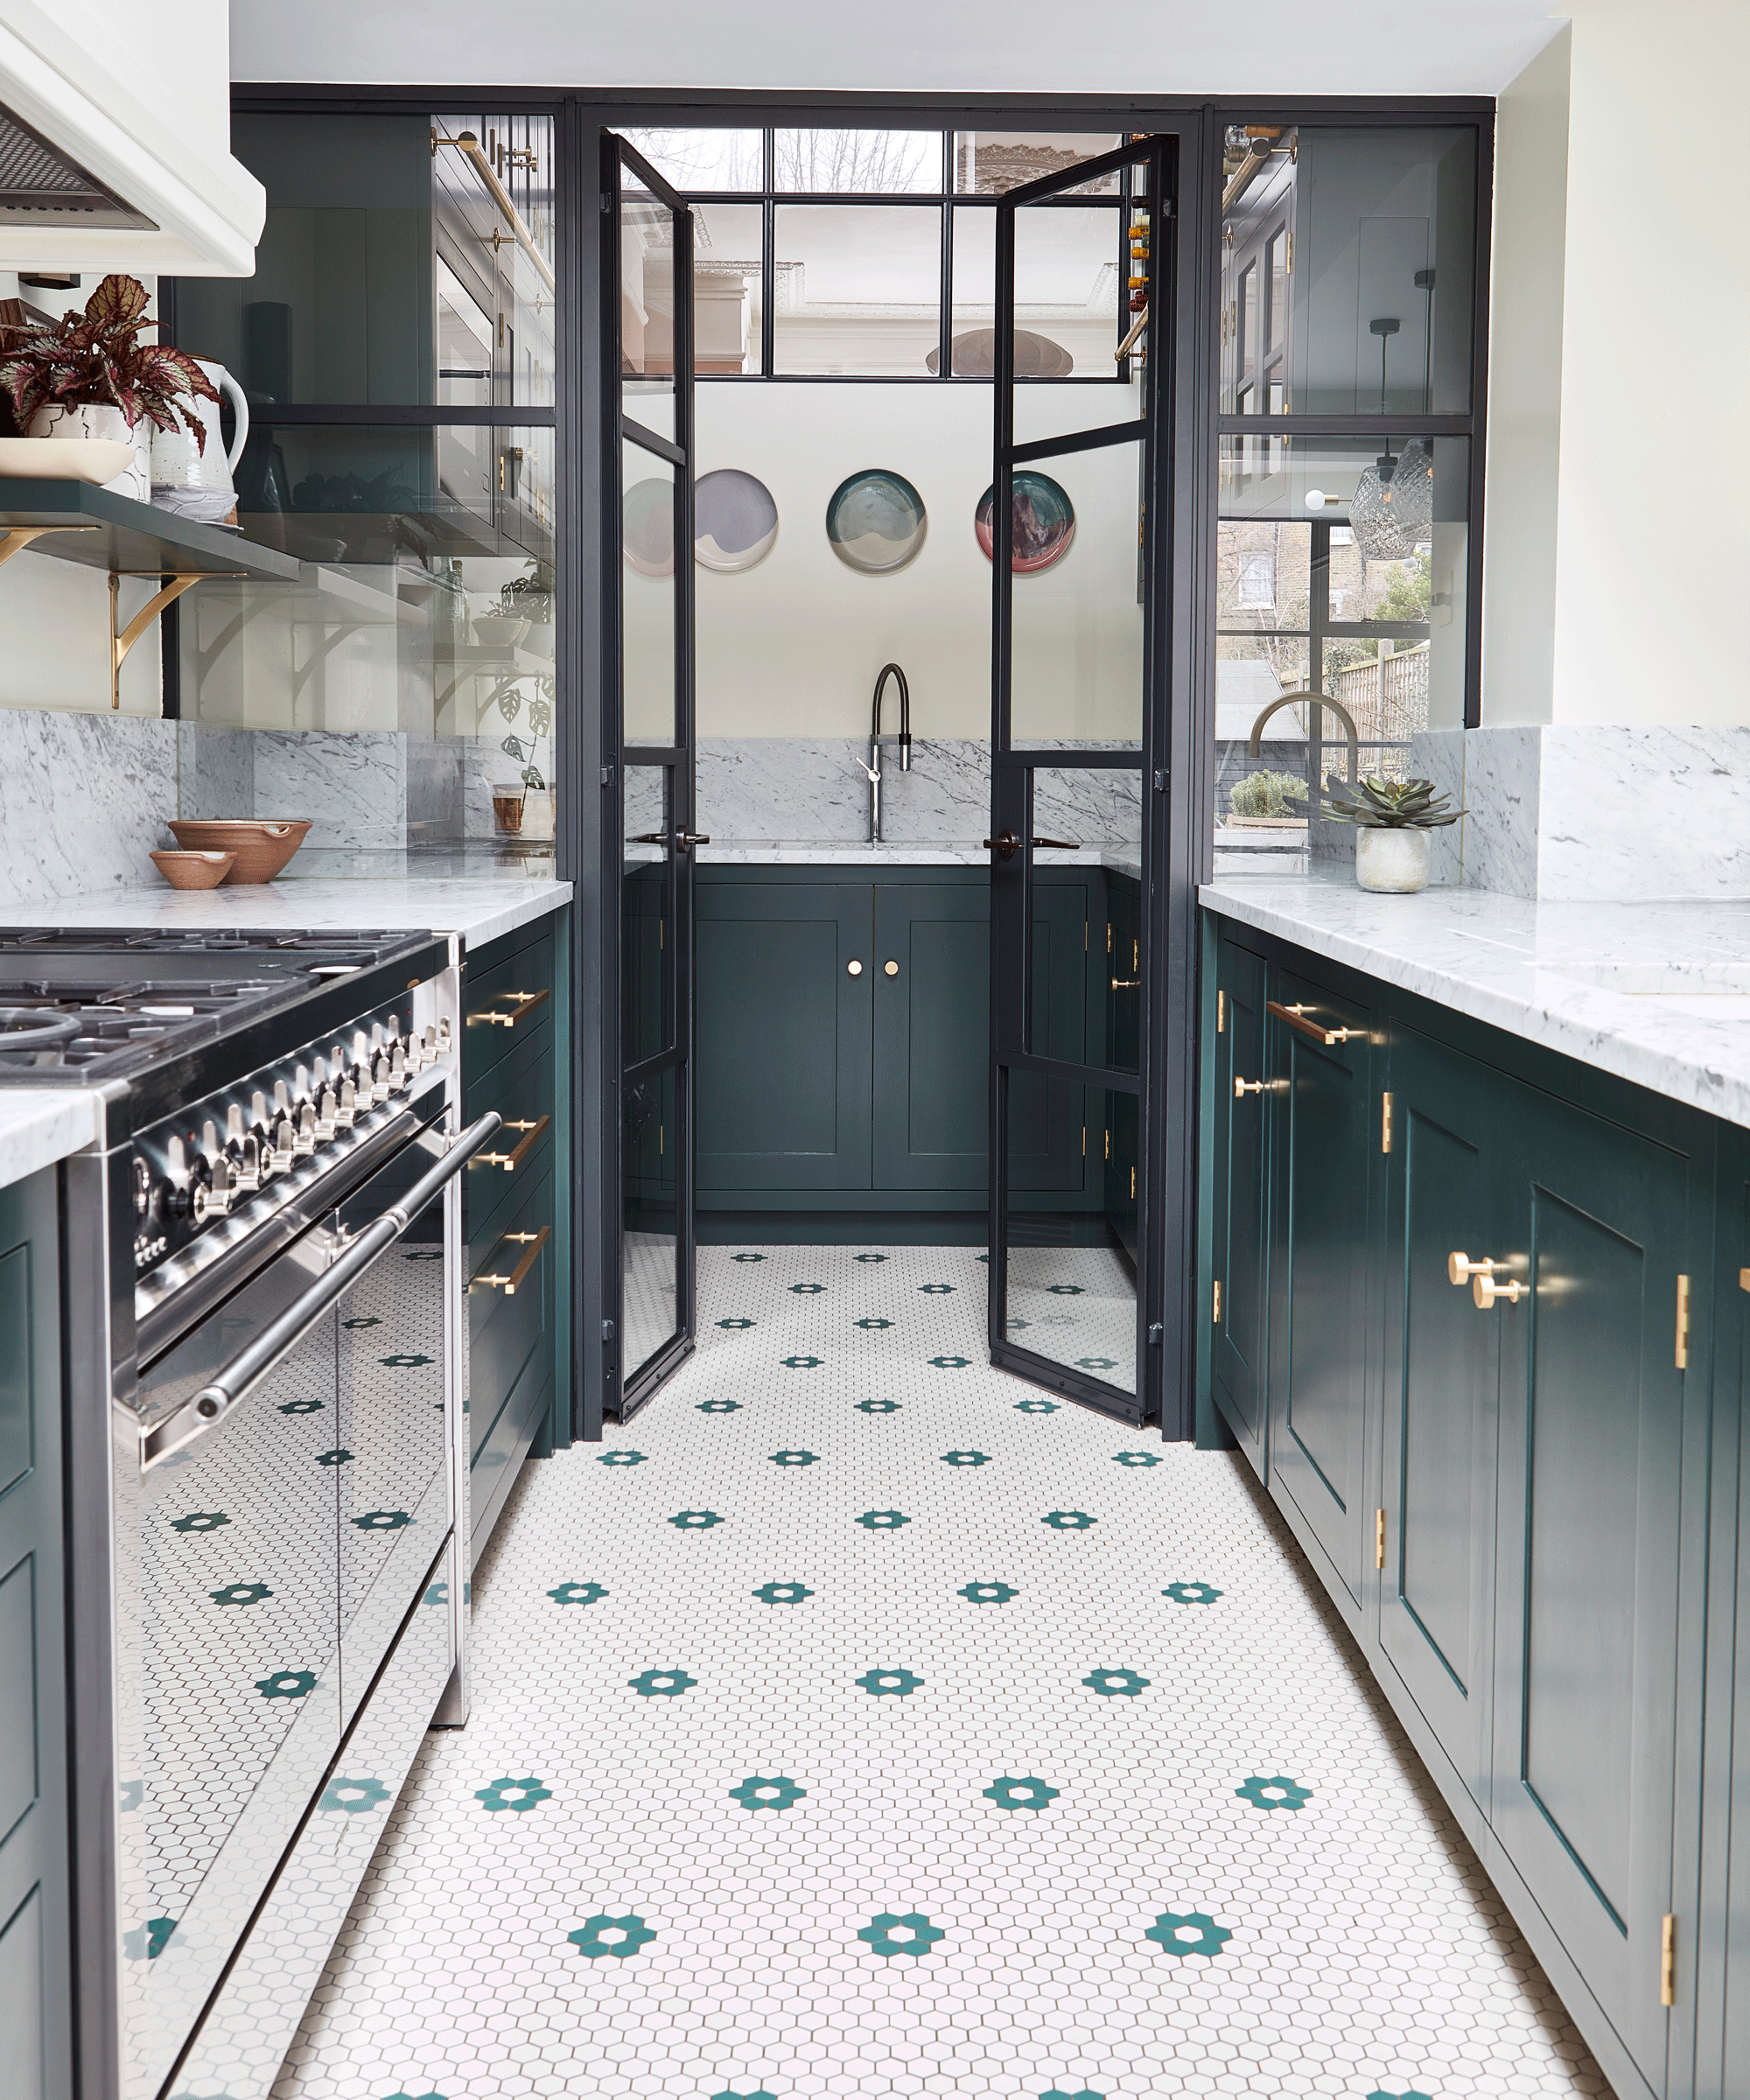 Kitchen with penny tiles and blue cabinetry